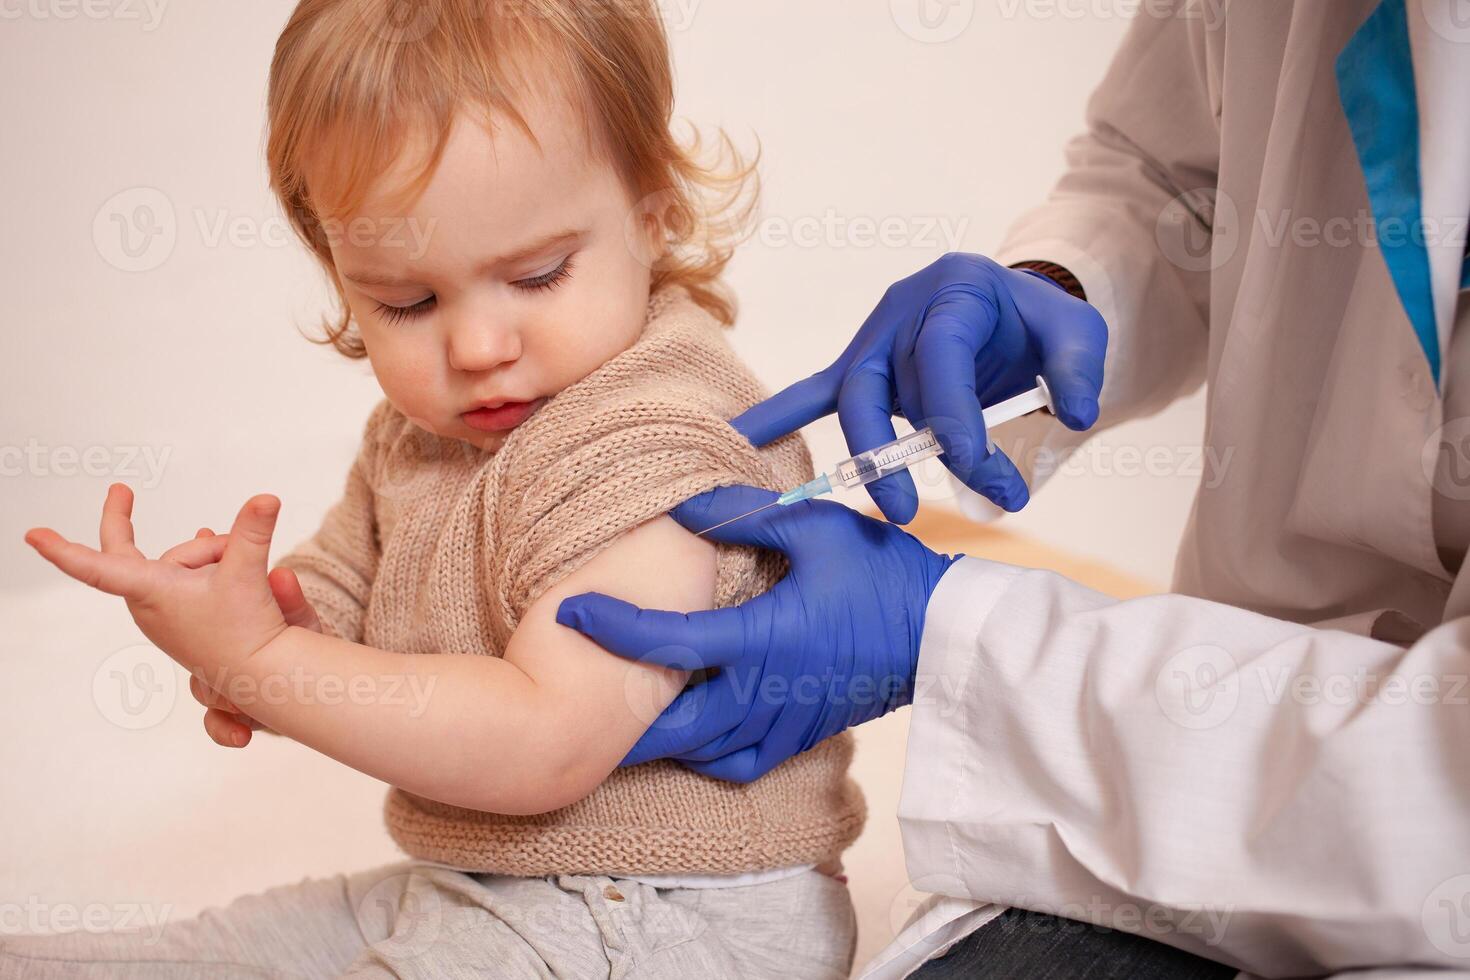 The doctor vaccinates the child against coronavirus. The child is crying and afraid. A man in a robe, hat, mask and gloves makes an injection to the child. Home quarantine photo